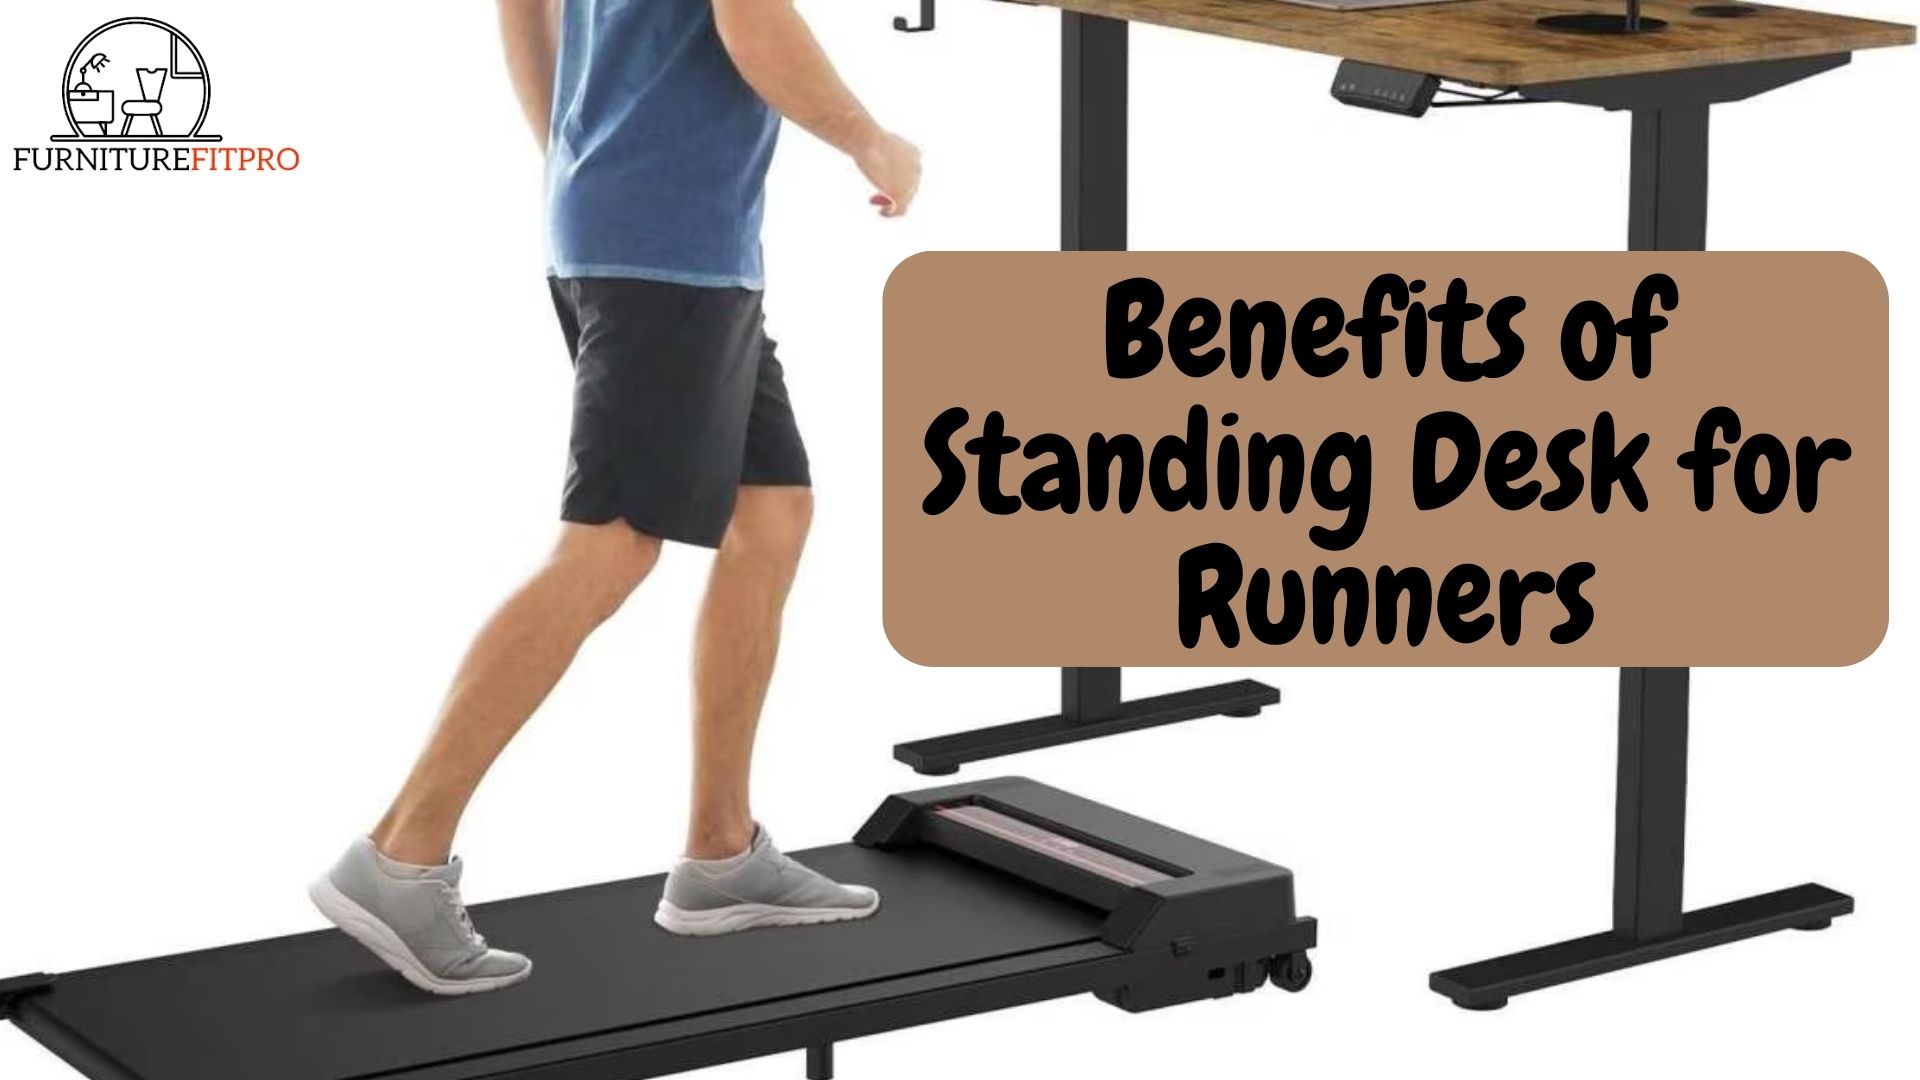 Benefits of Standing Desk for Runners